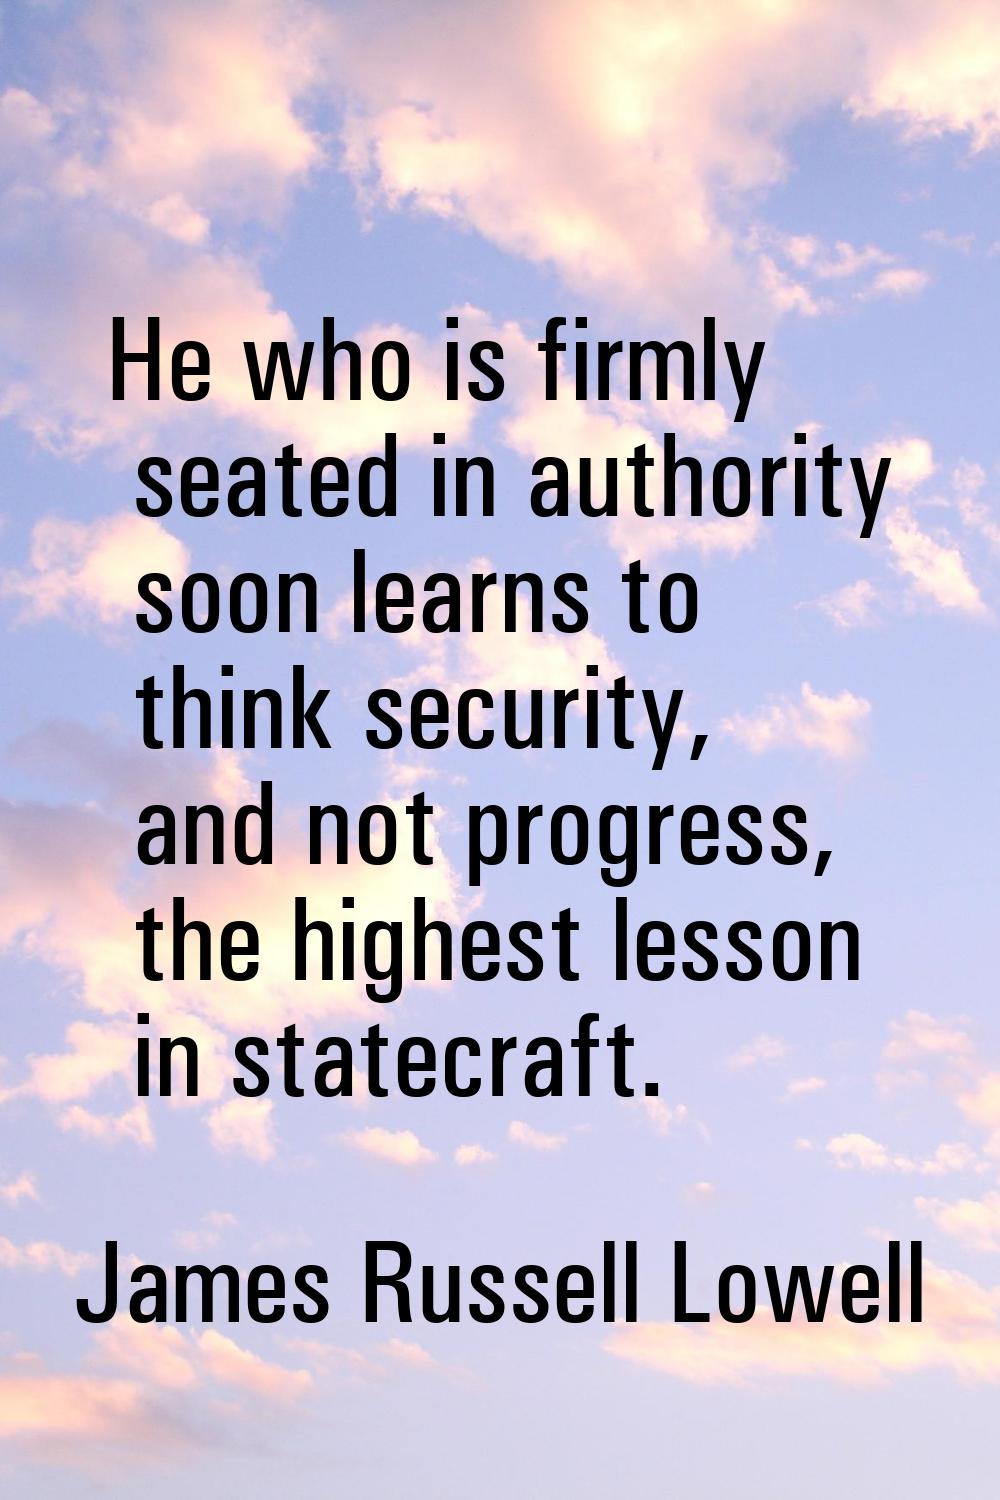 He who is firmly seated in authority soon learns to think security, and not progress, the highest l